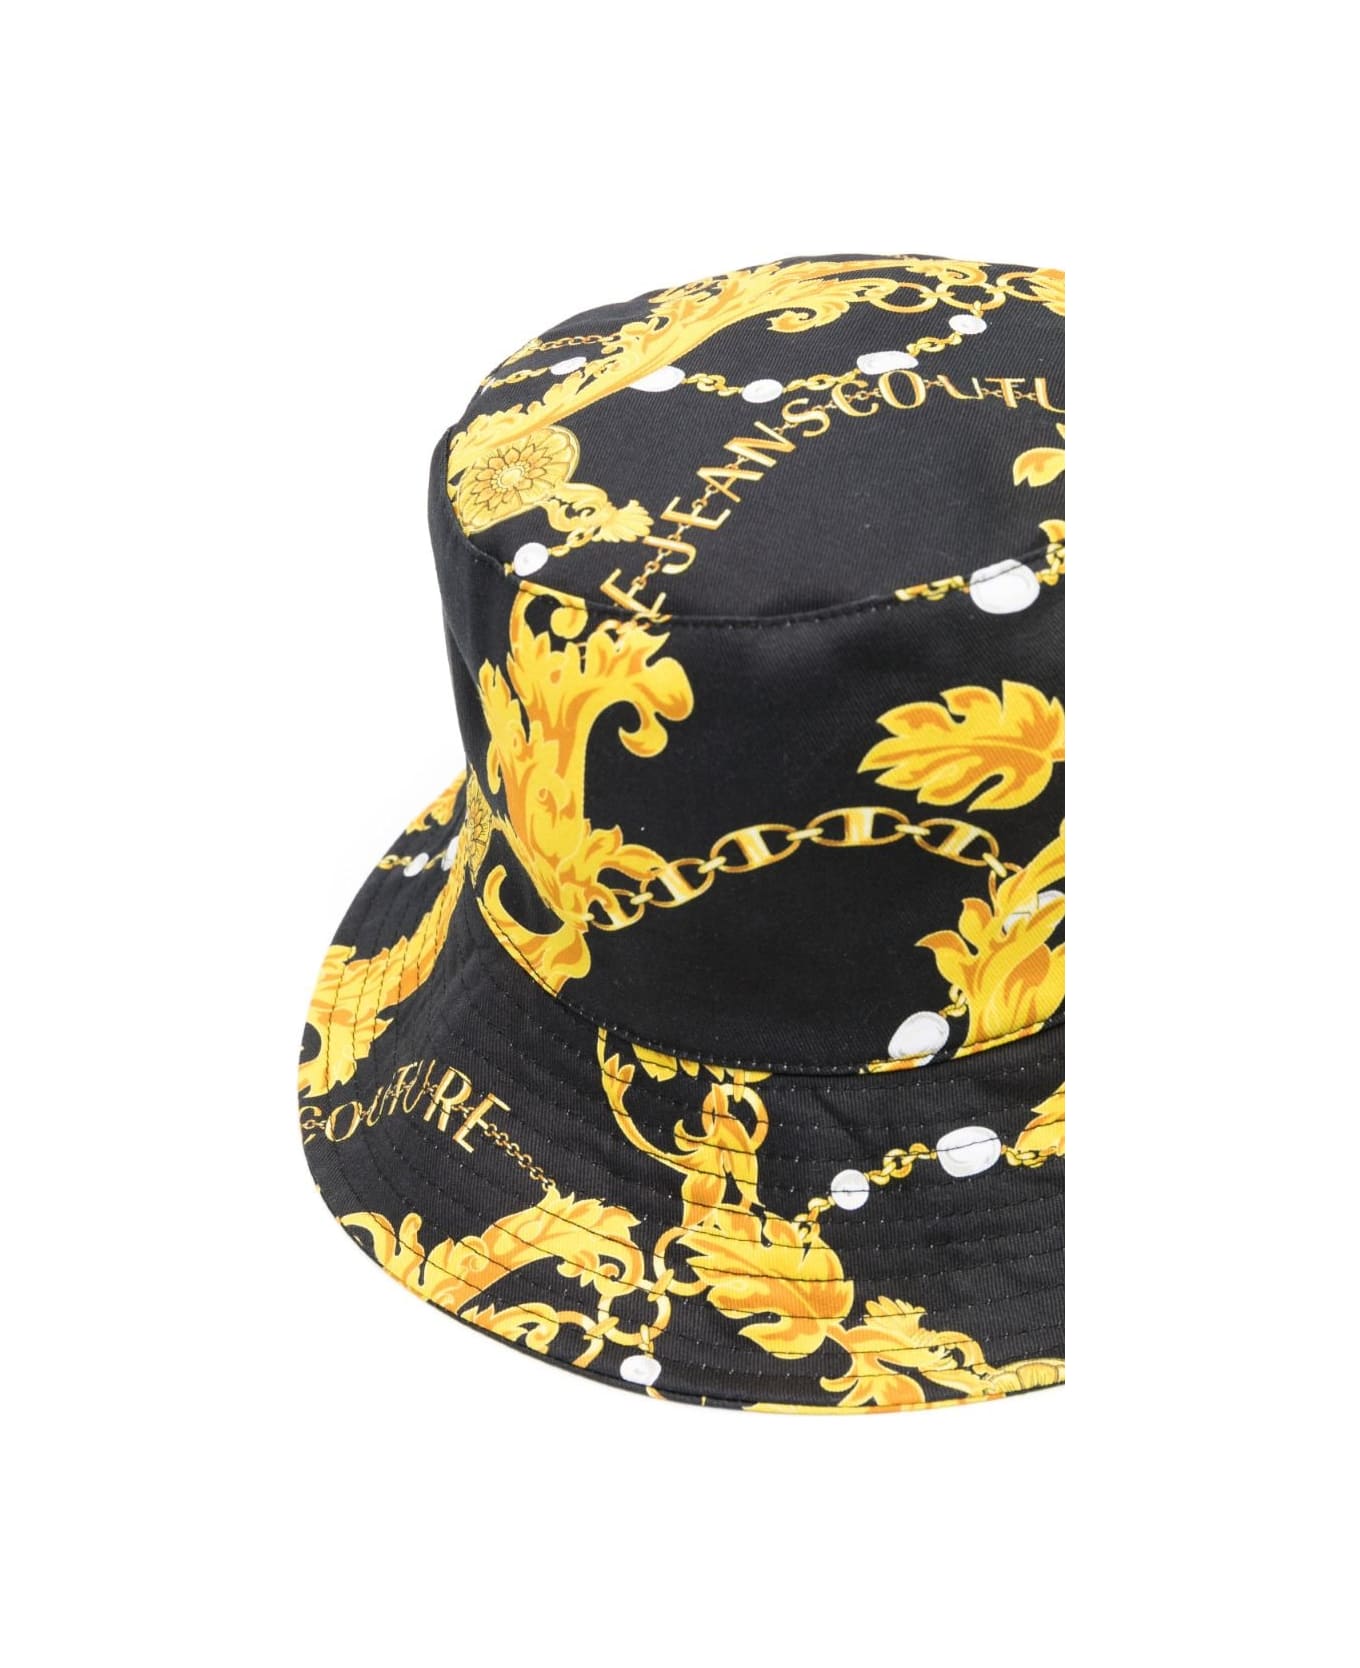 Versace Jeans Couture Printed Chain Bucket Hat - Black Gold